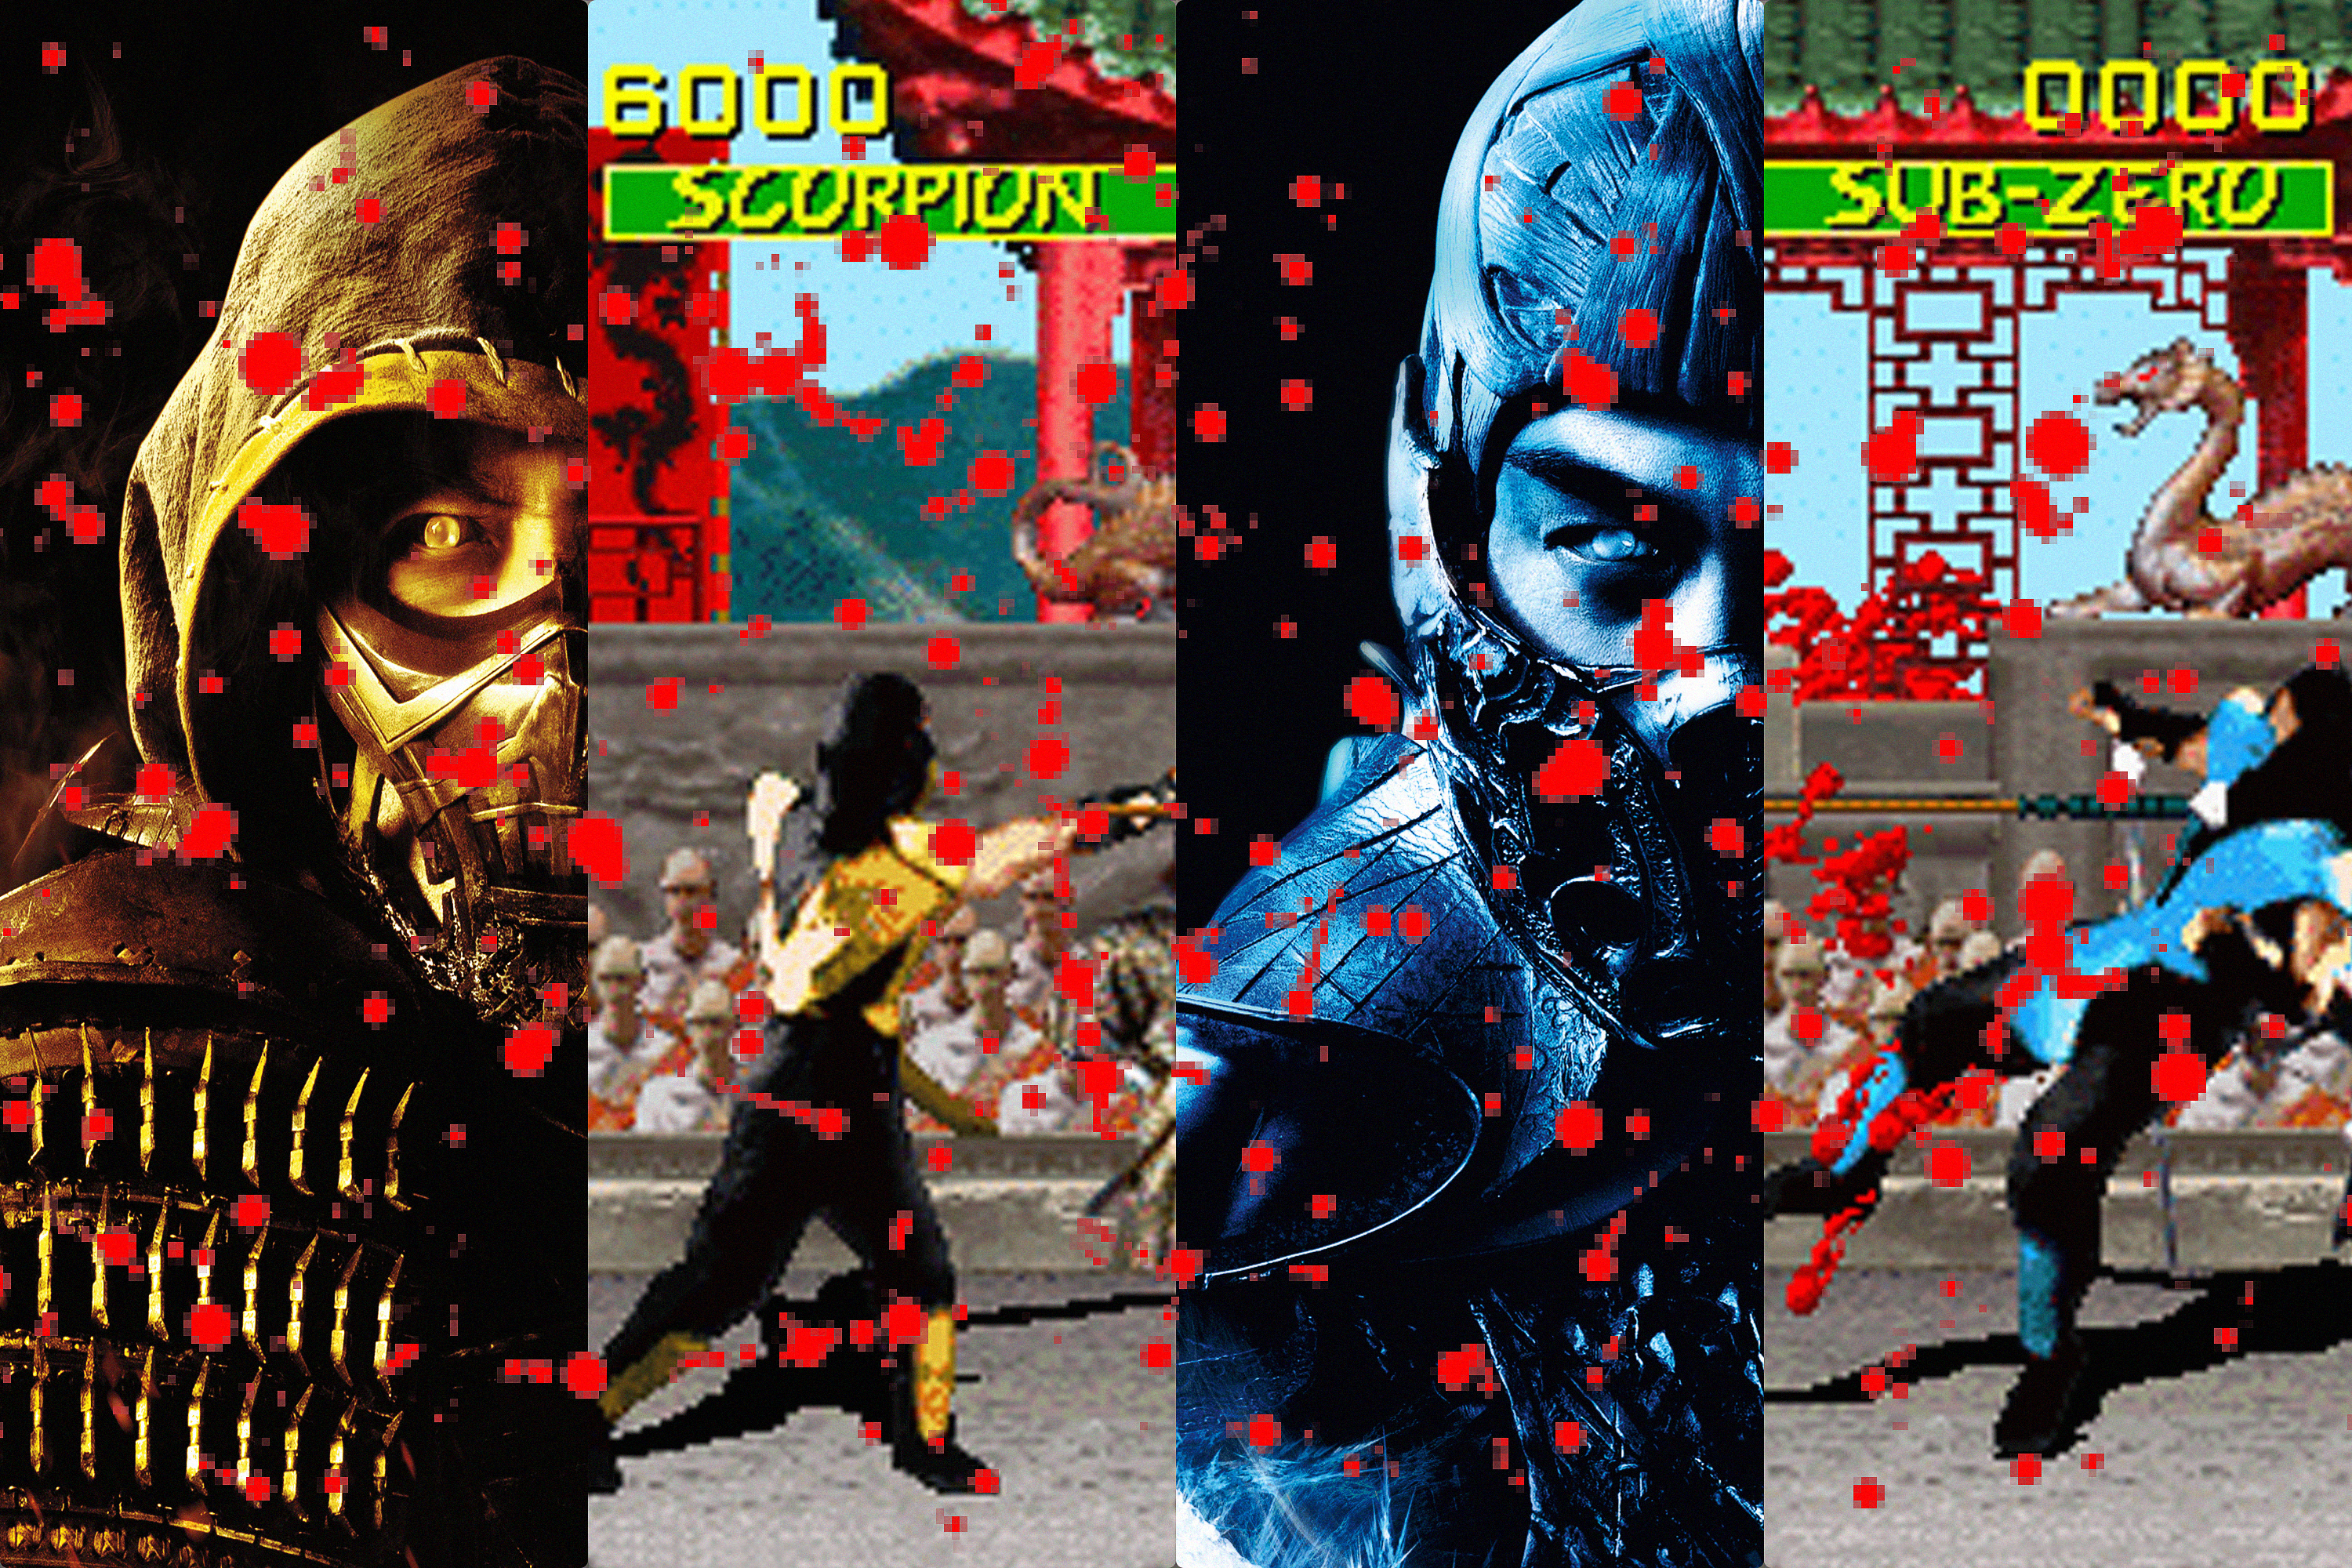 Graphic with images of the Scorpion and Sub-Zero characters from both the Mortal Kombat movie and the game.